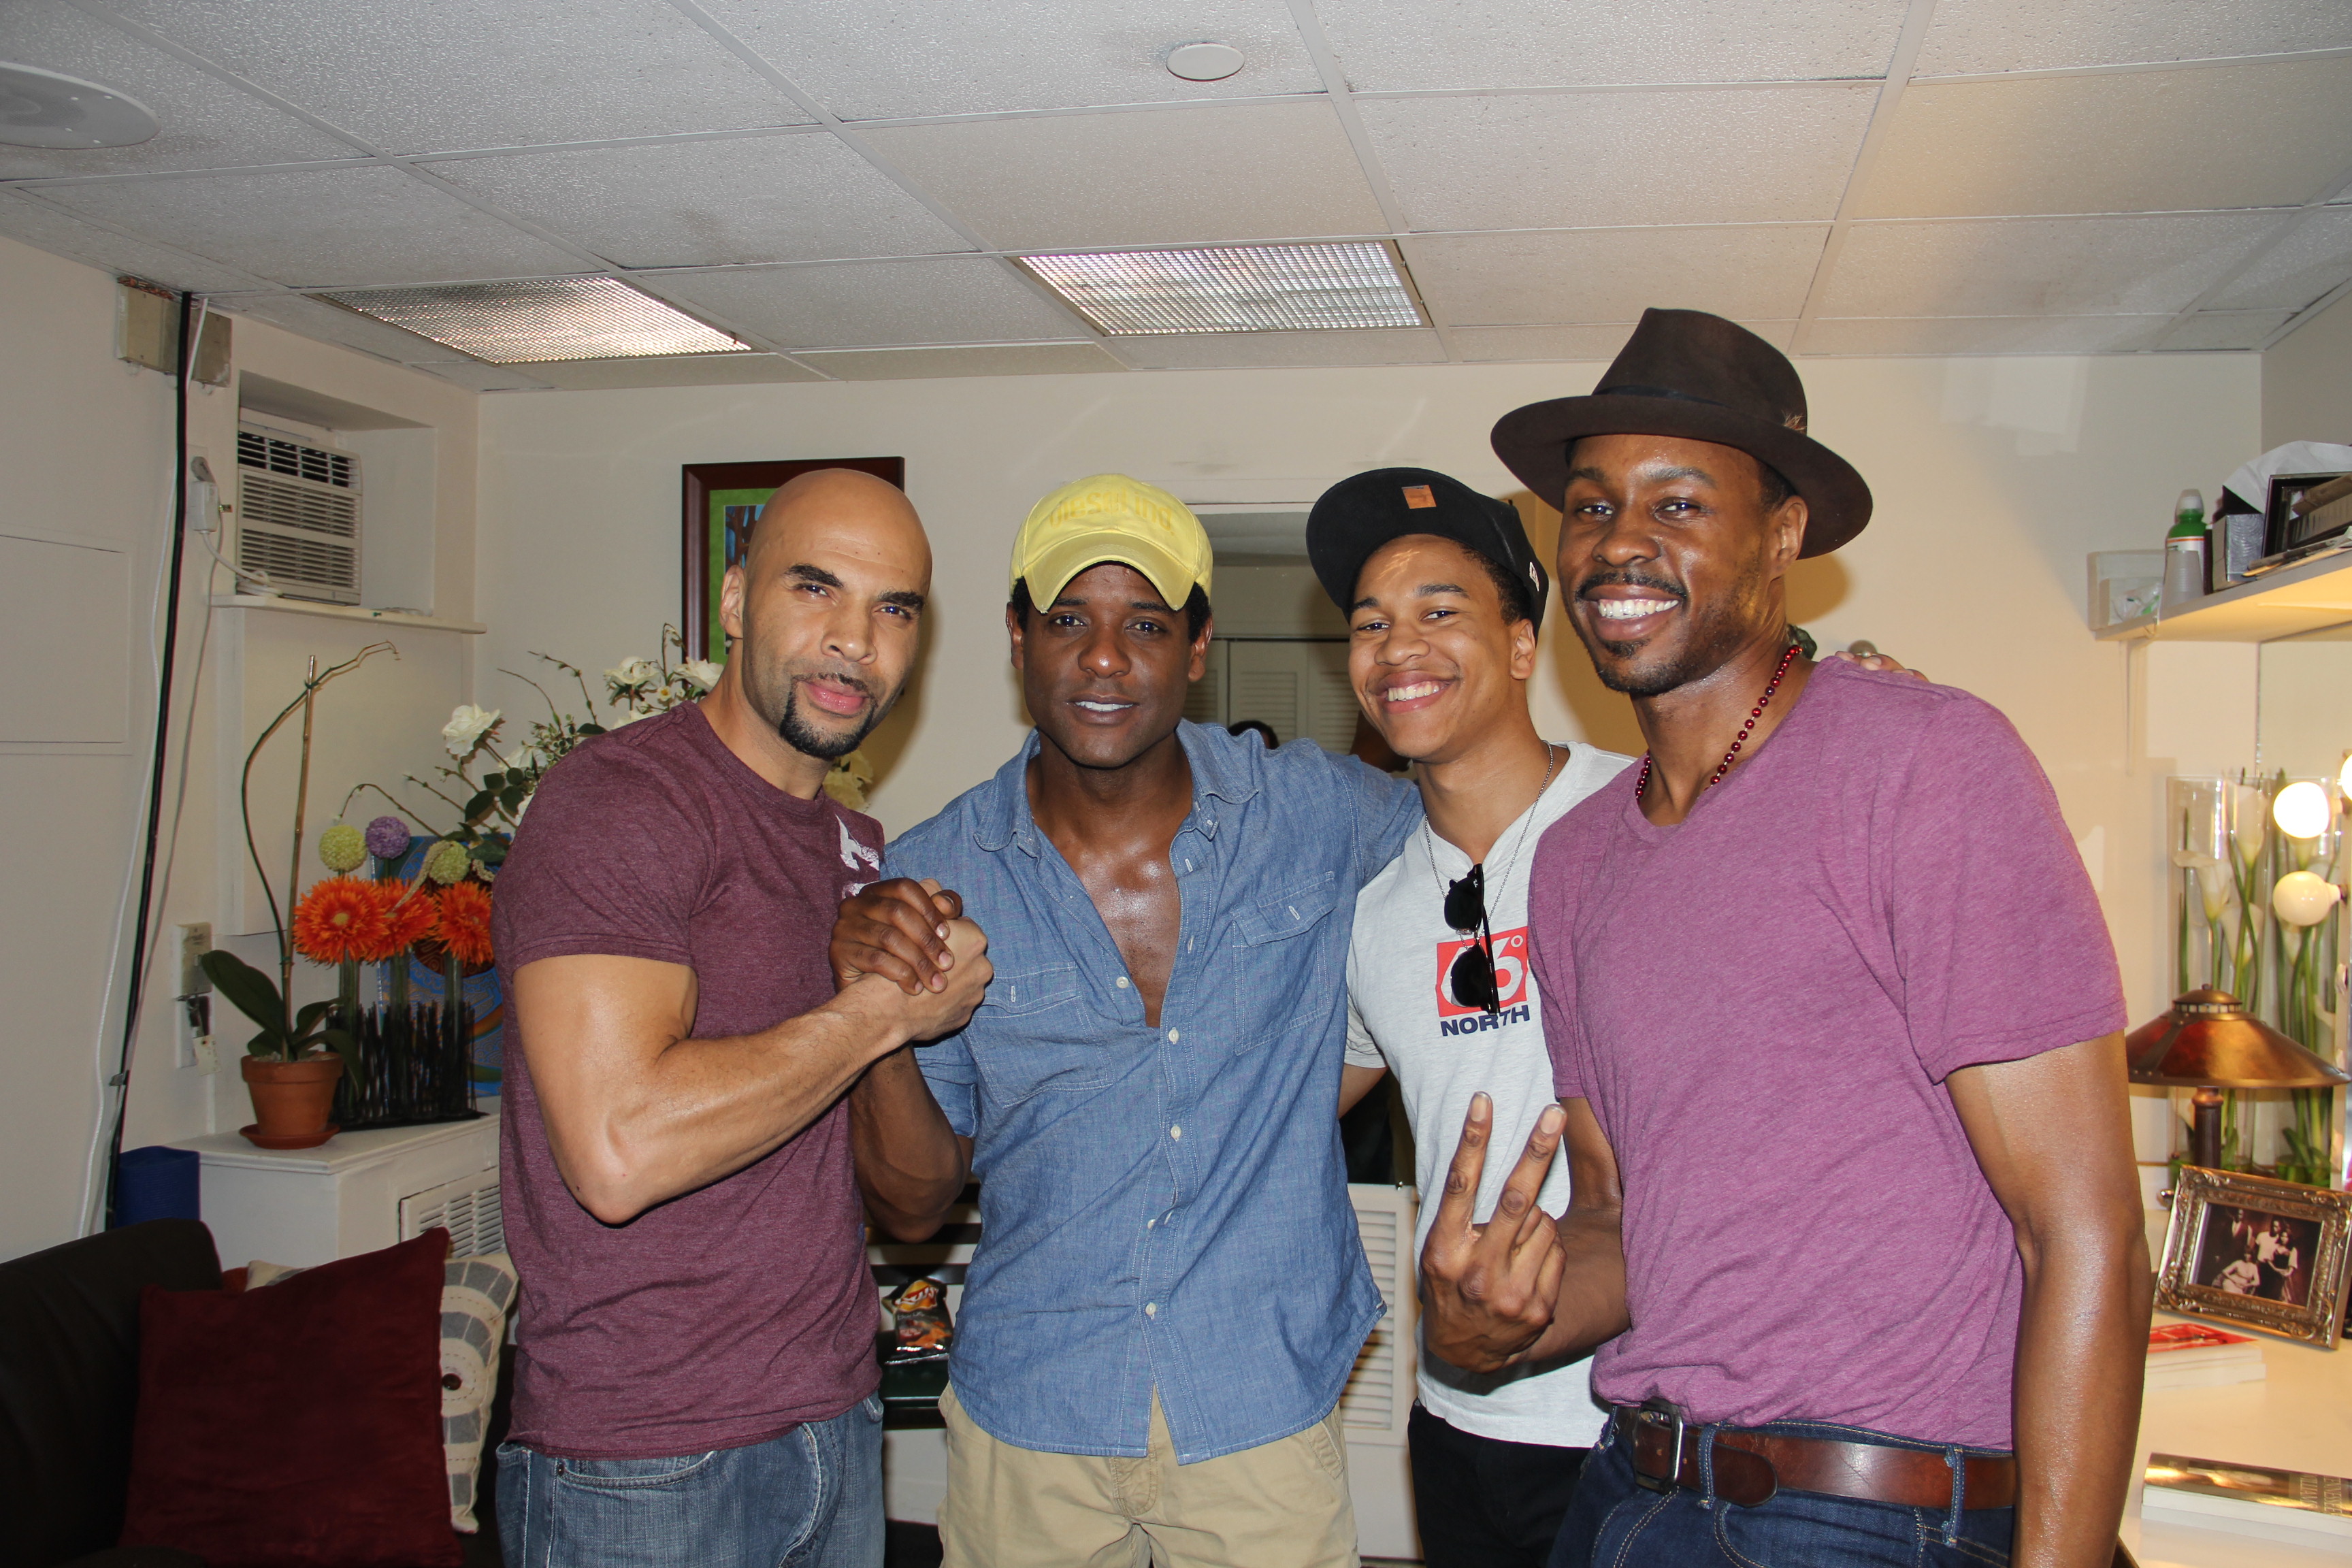 Cast of A 'Streetcar Named Desire on Broadway' 2012. Starring (left to right)Jacinto Taras Riddick, Blair Underwood, Aaron Clifton Moten and Wood Harris.